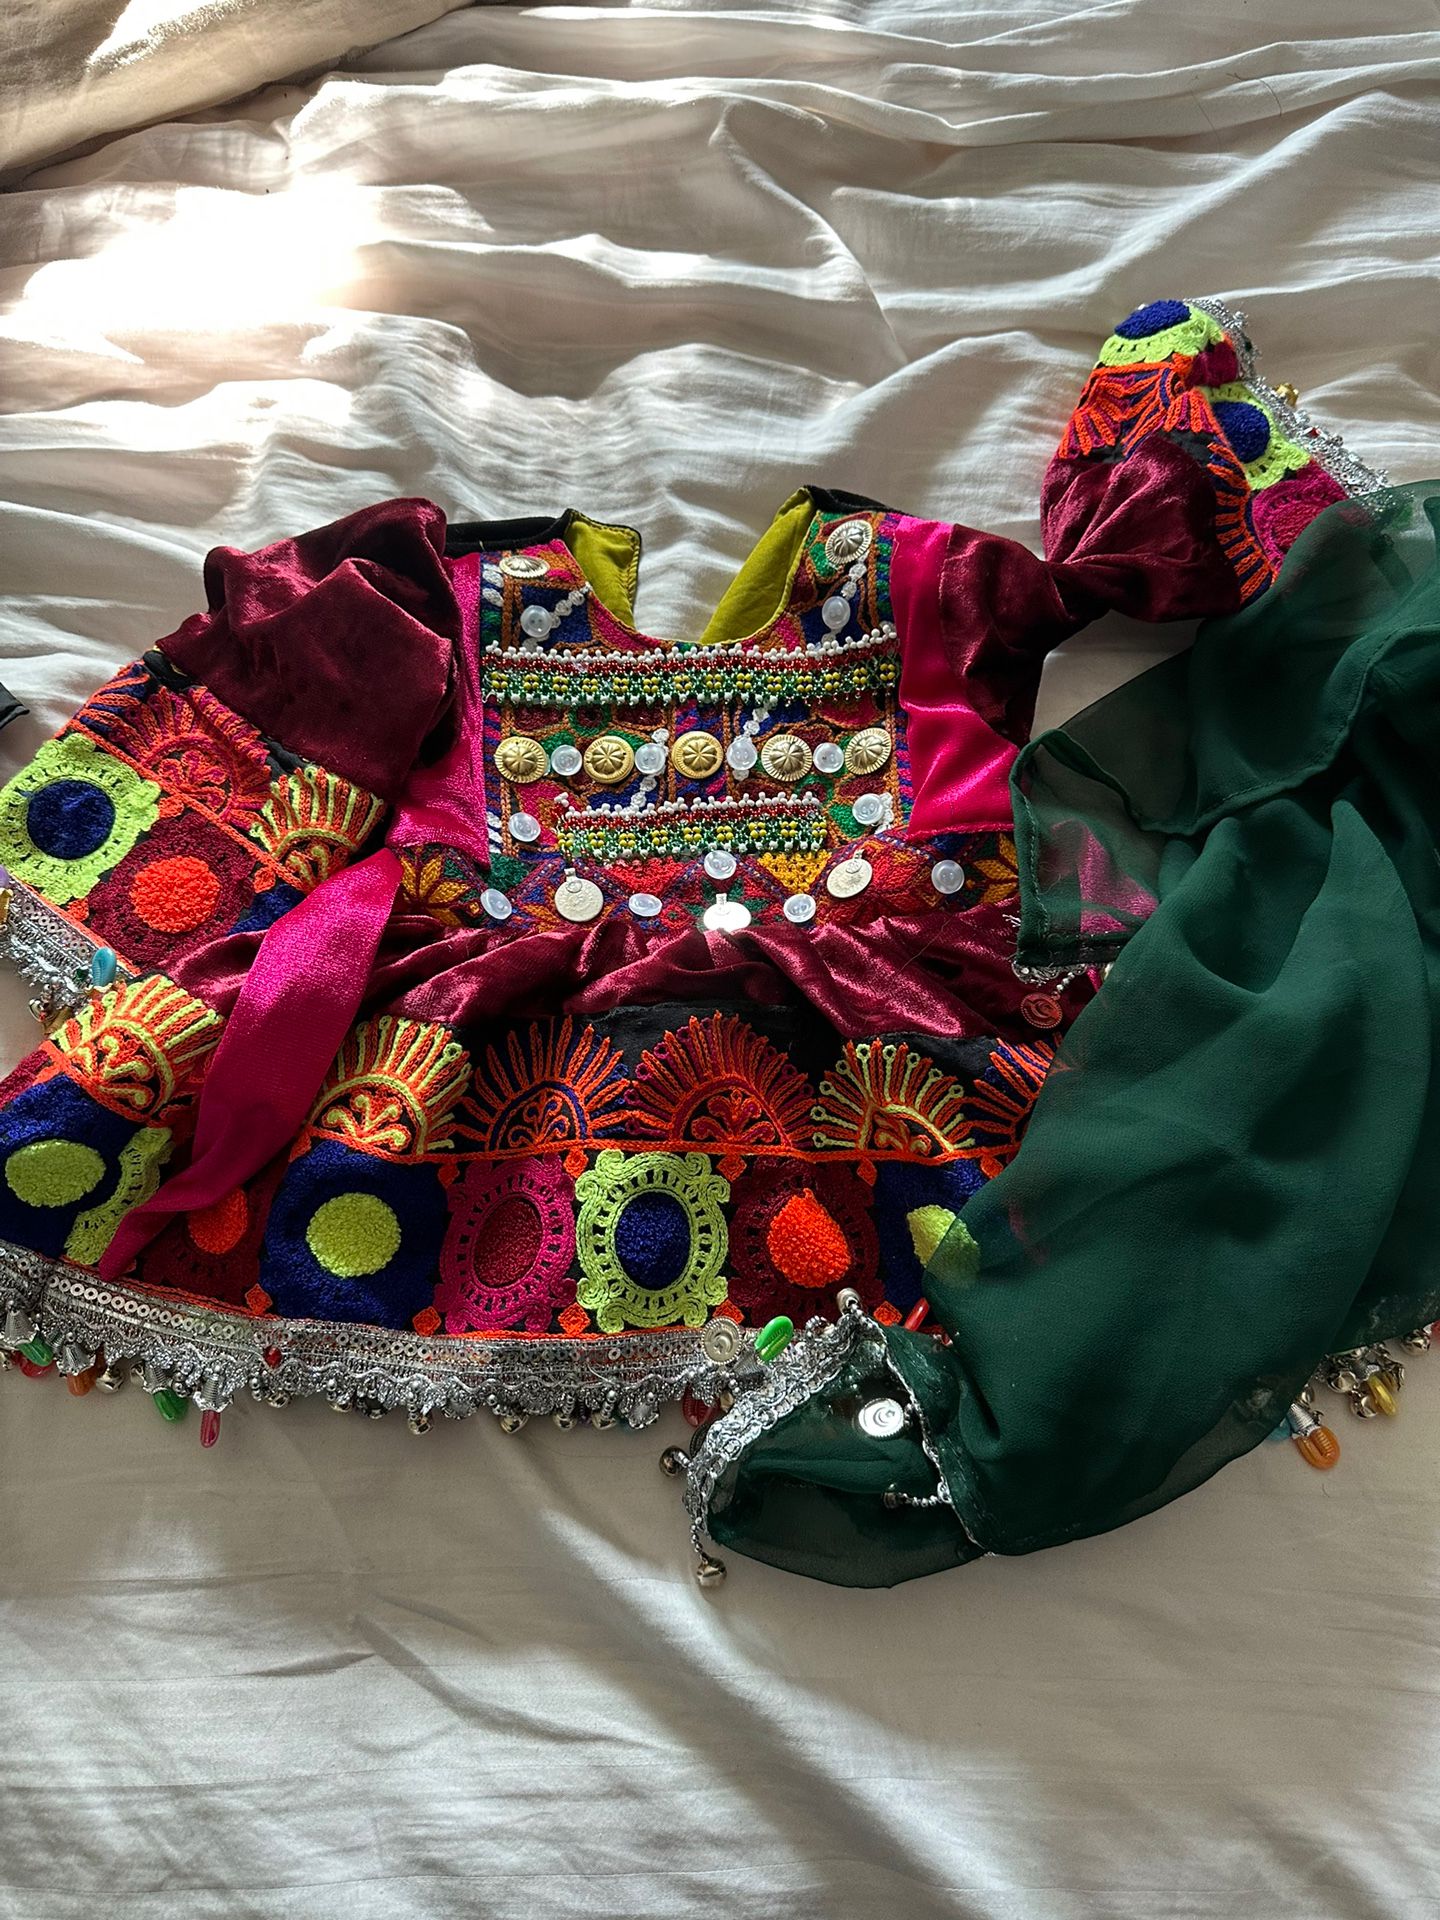 Little Girls Afghani Clothes